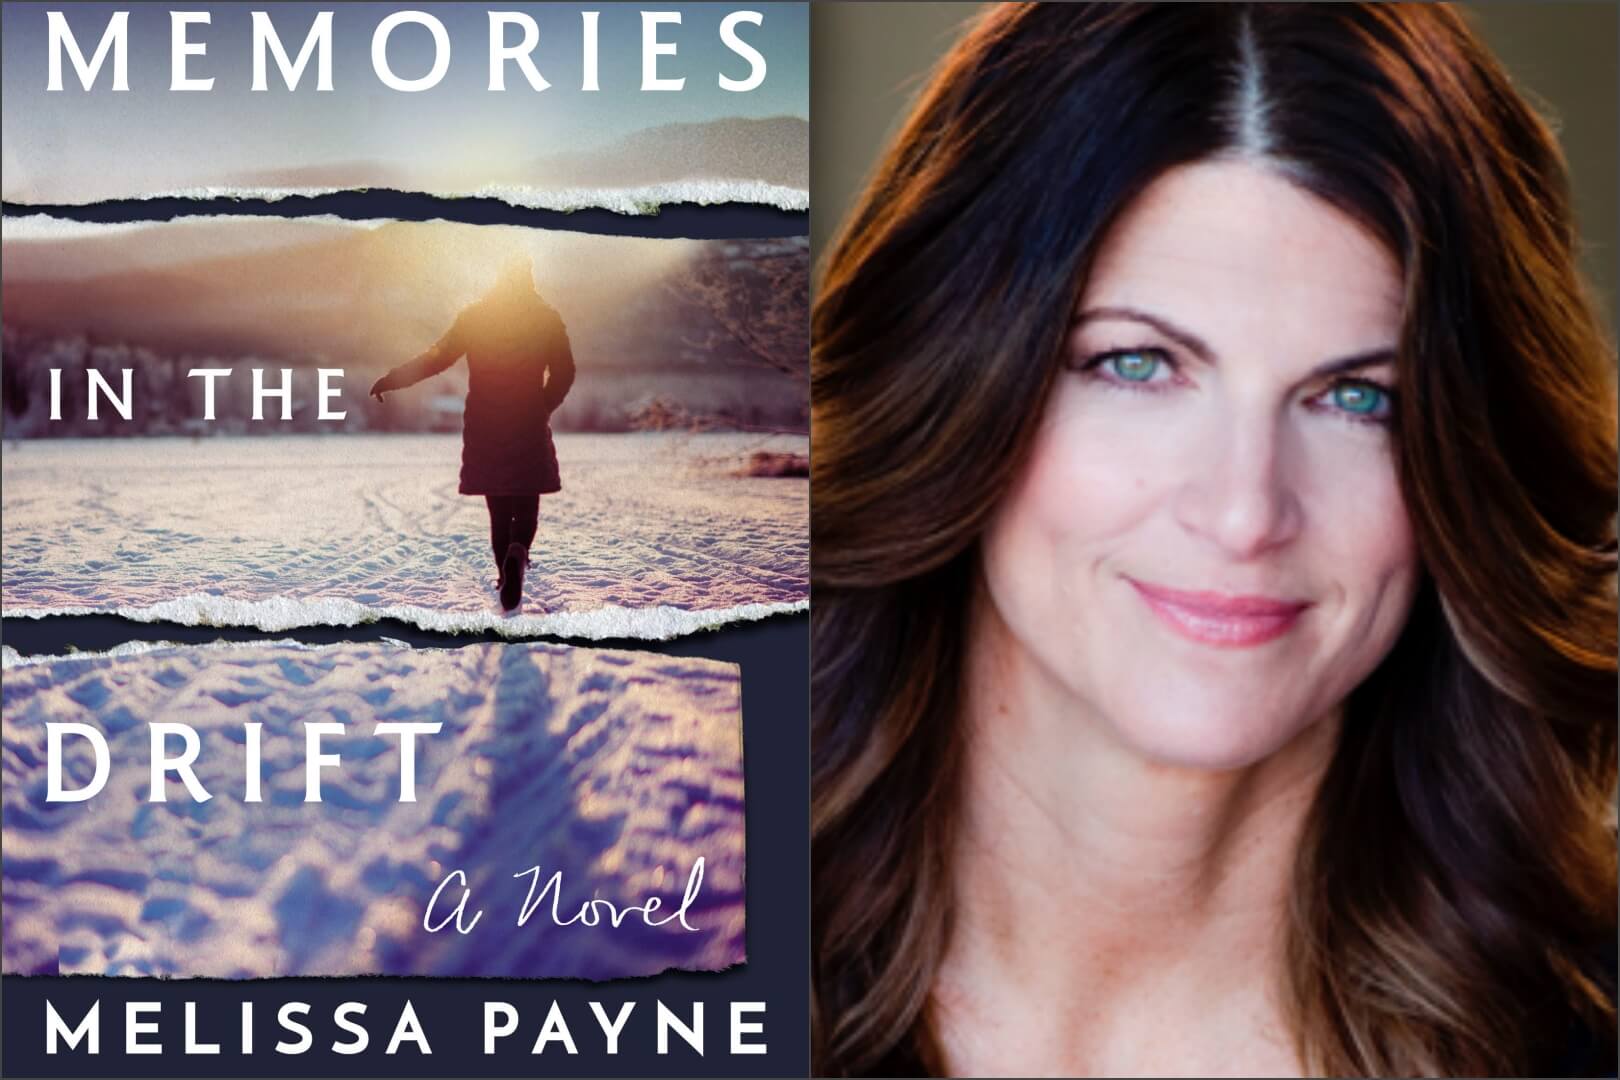 Q&A with Melissa Payne, Author of Memories in the Drift